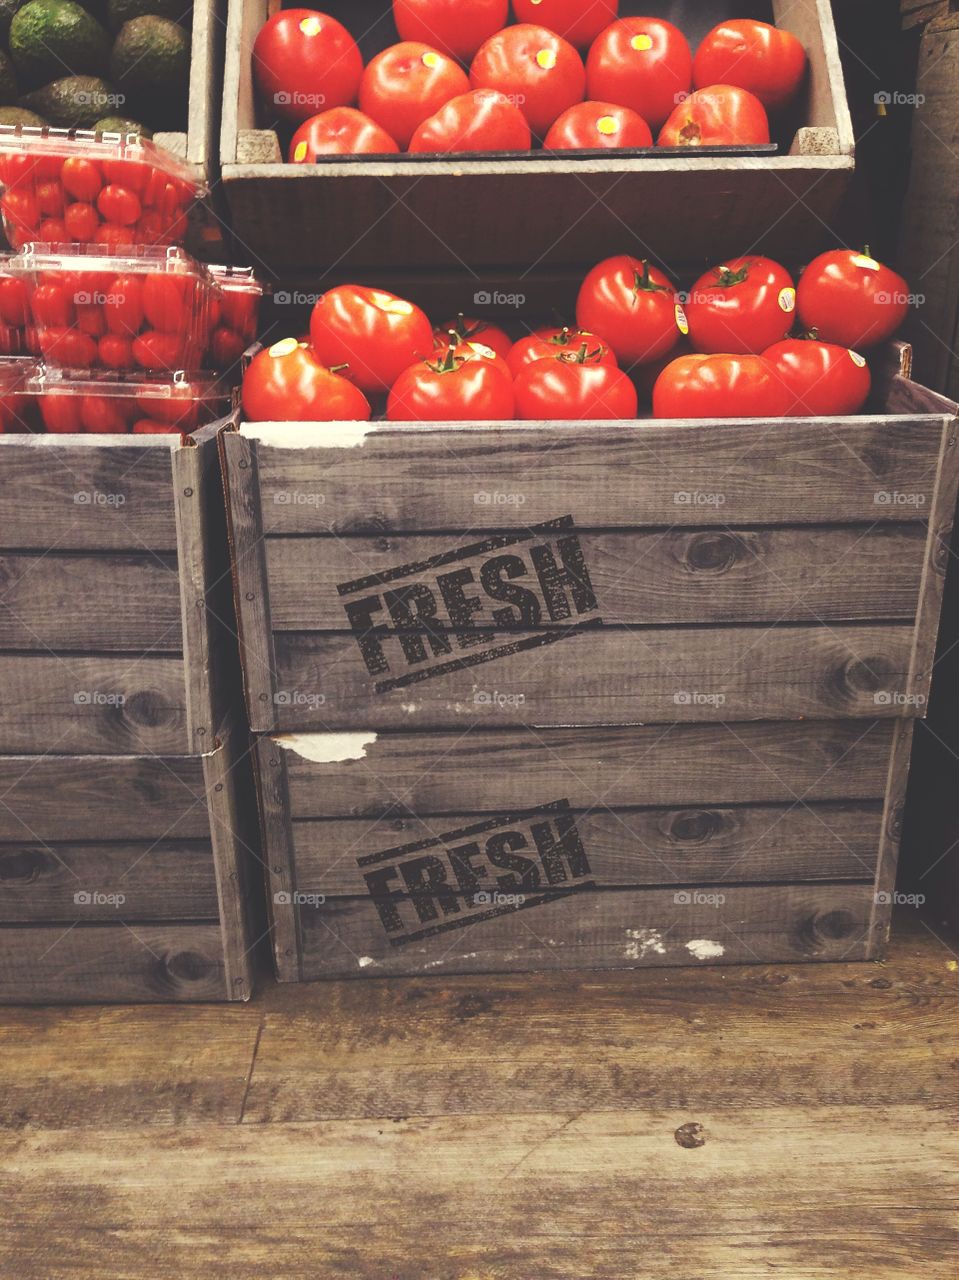 Tomatoes in a crate 